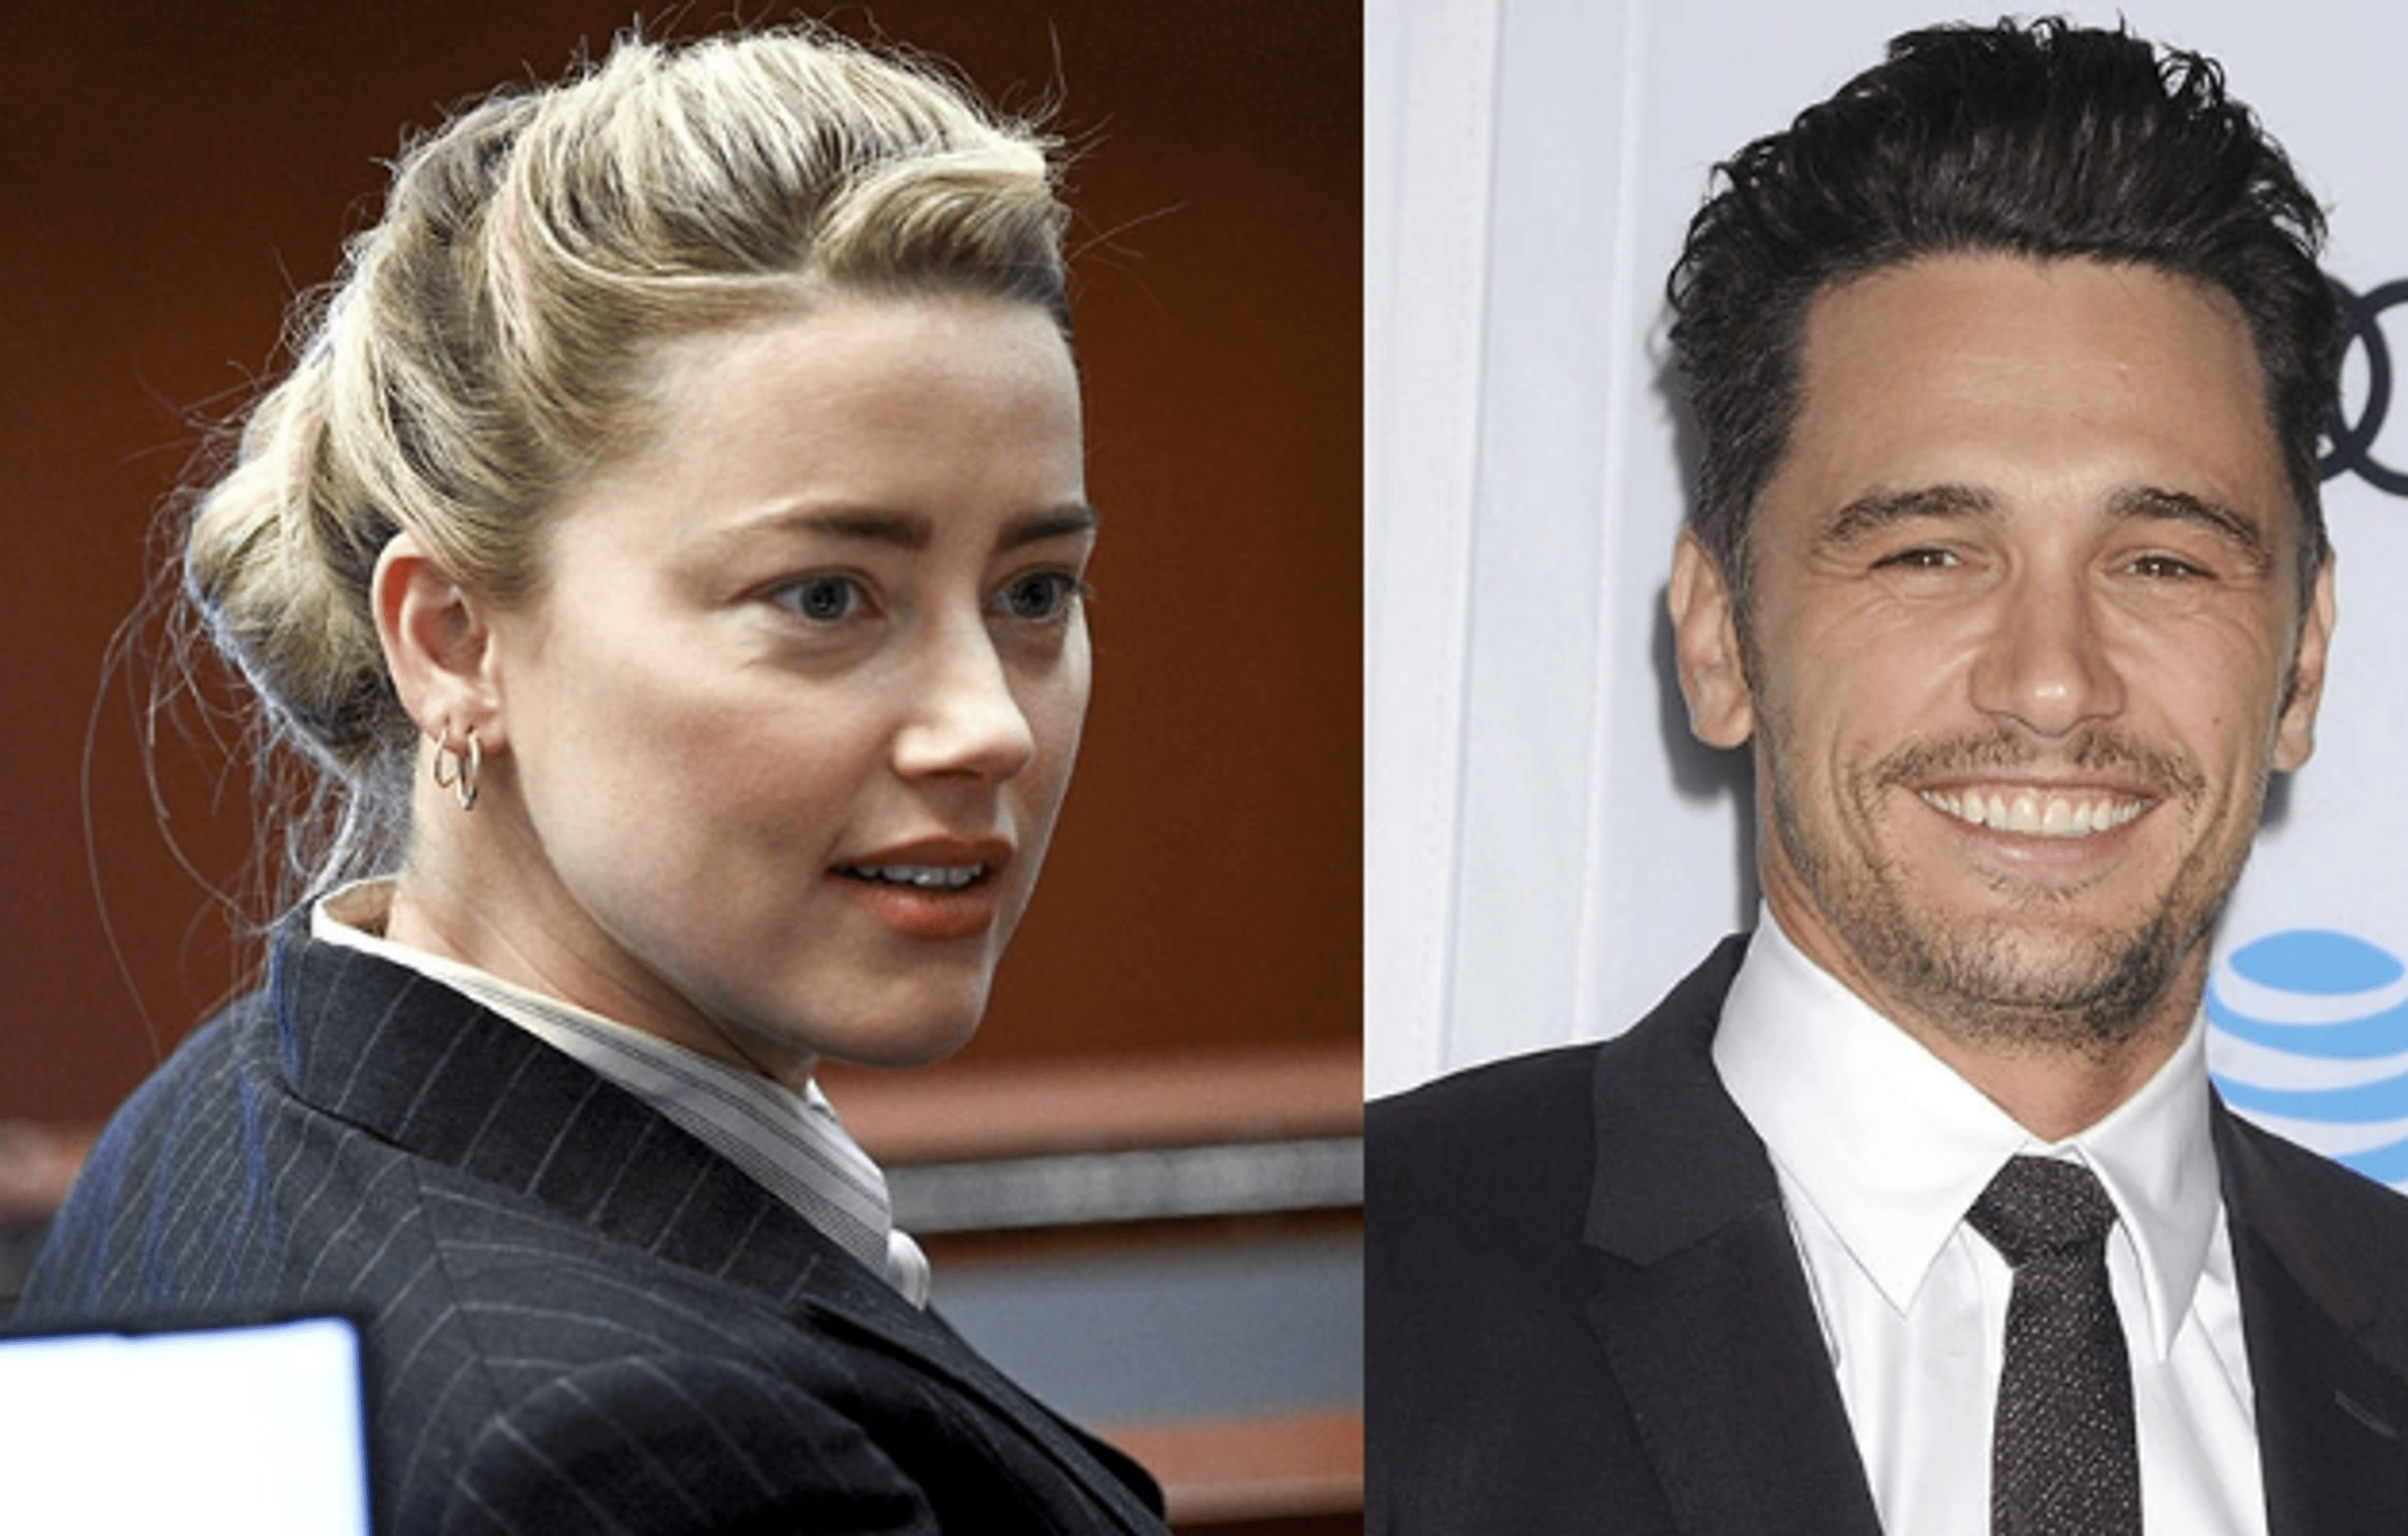 amber-heard-had-commented-on-the-rumors-about-the-affair-with-james-franco-when-she-was-married